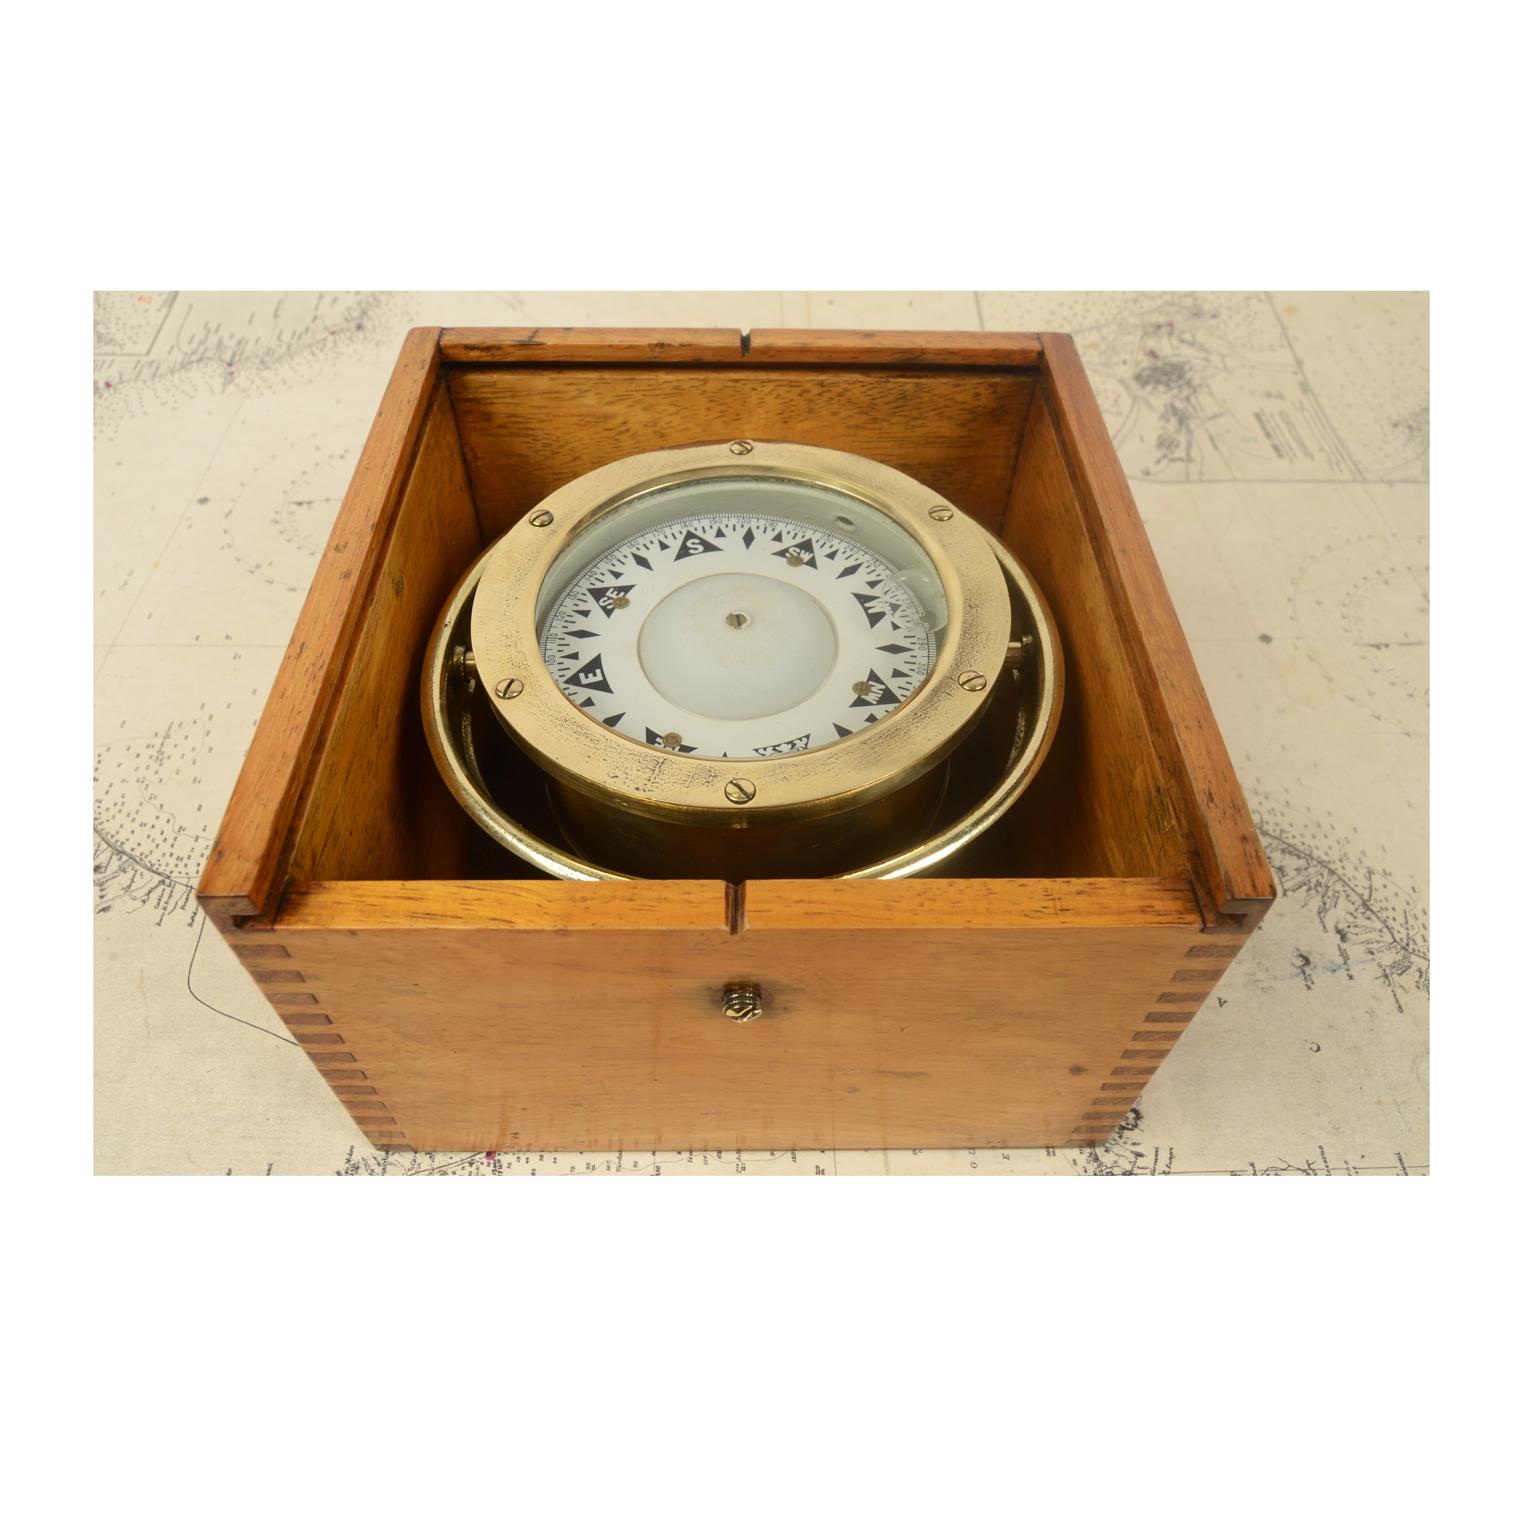 Early 20th Century 1900s Sestrel  Antique Nautical Magnetic Compass in its Original Wooden Box   